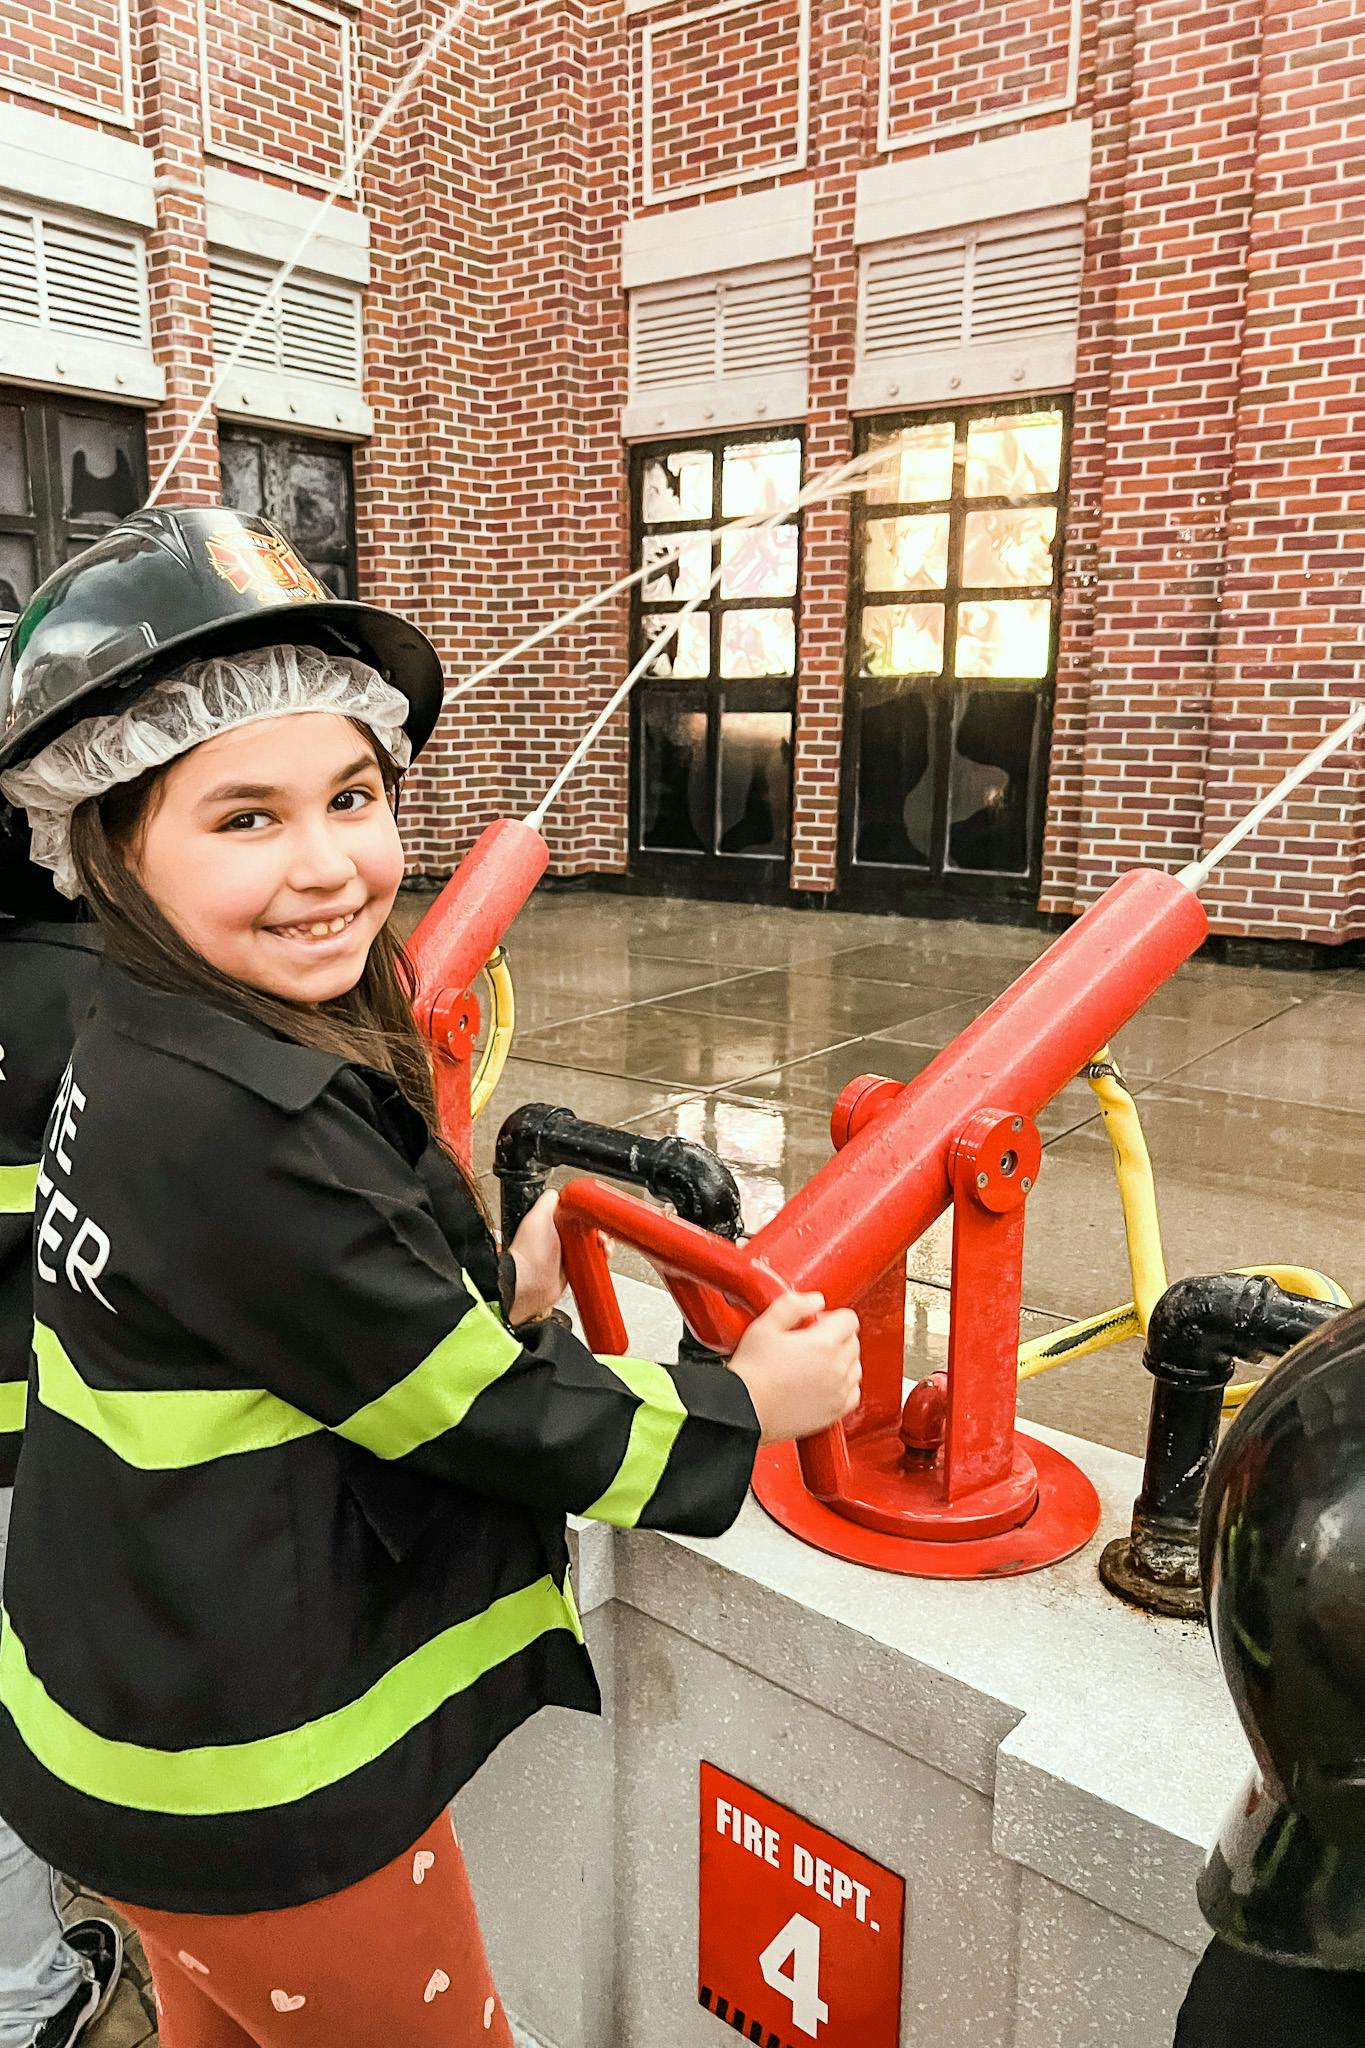 A little girl puts out a fire at a firefighting play exhibit at Kidzania.